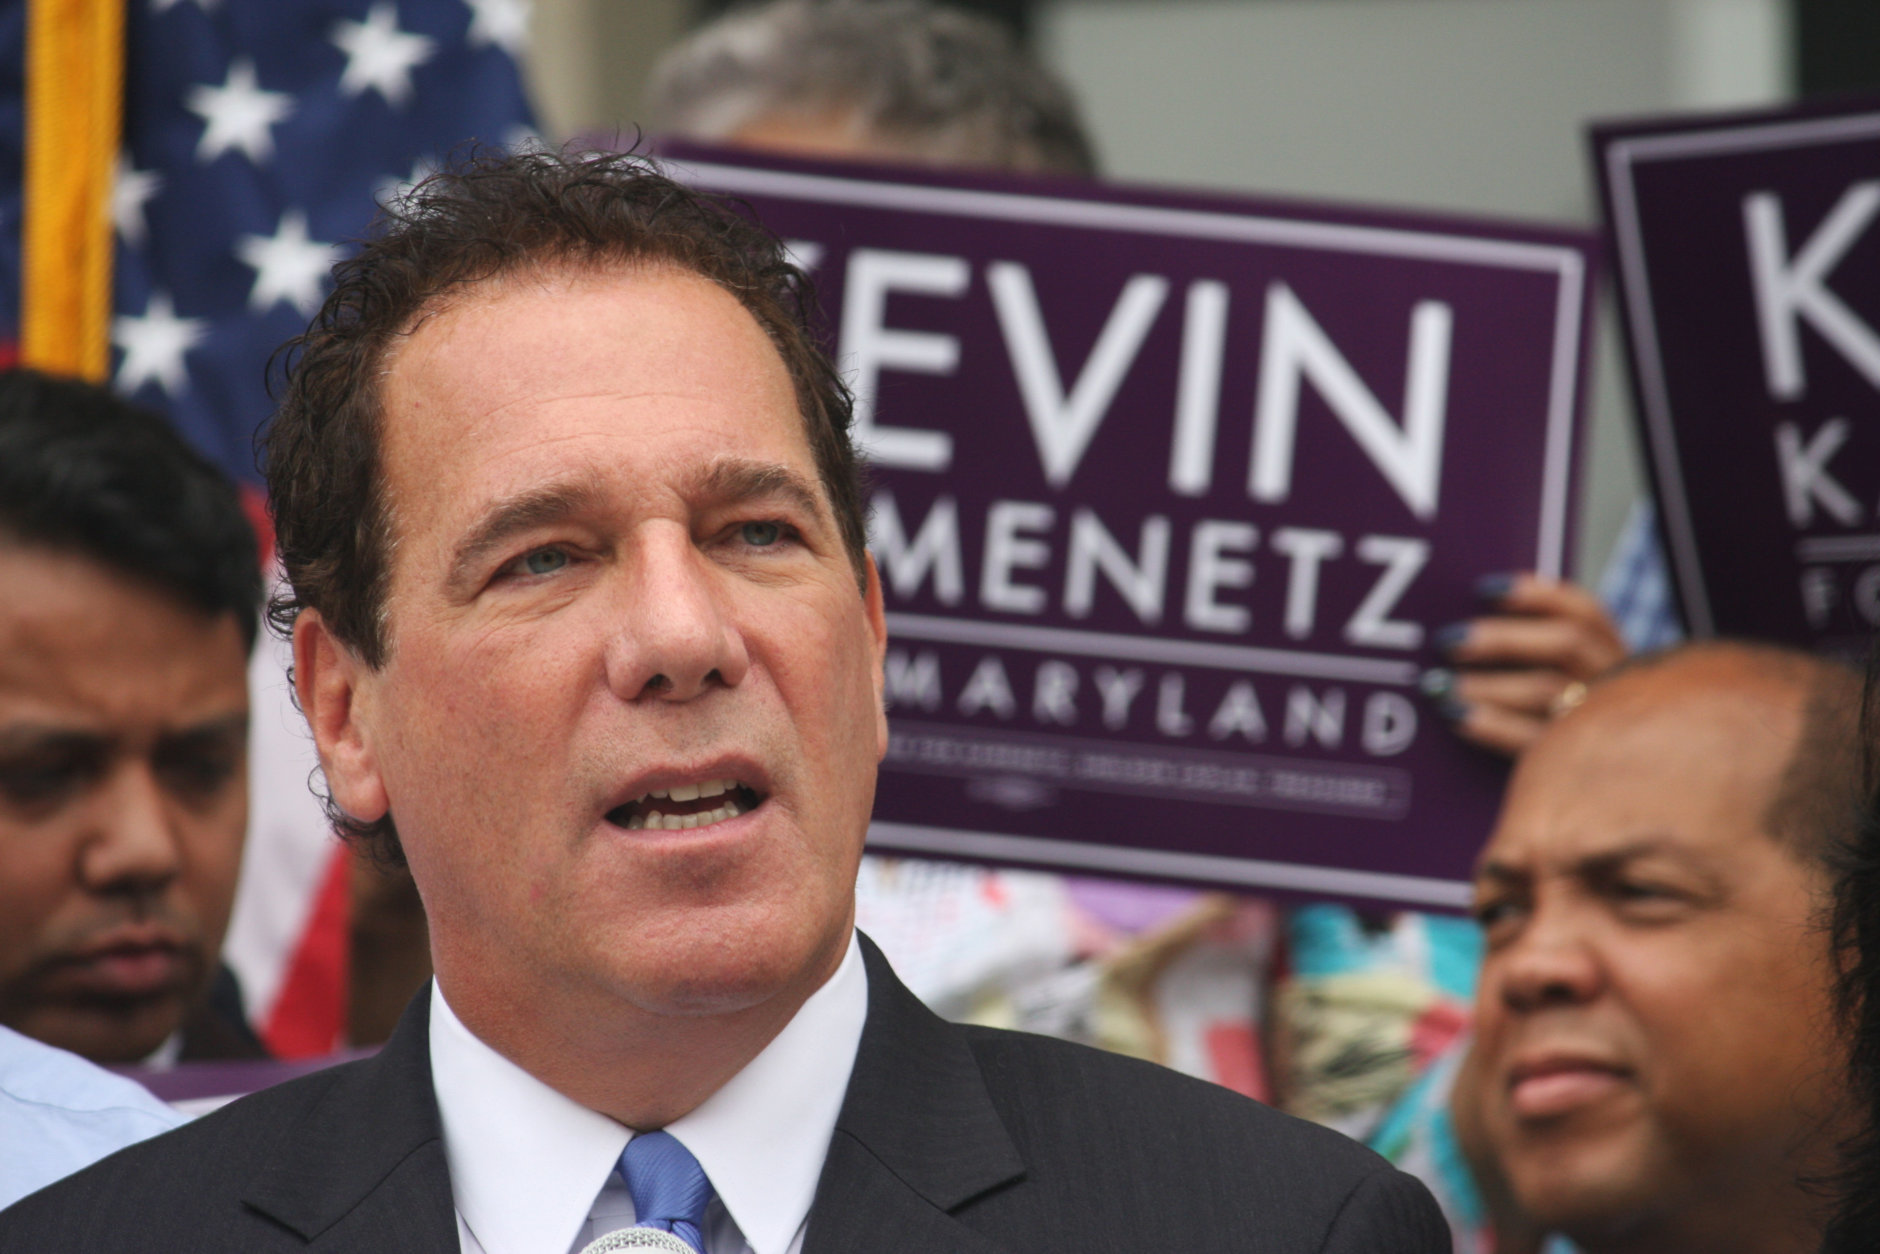 Baltimore County Executive Kevin Kamenetz announces he is joining the race for governor Monday, Sept. 18, 2017, in Towson, Md. Kamenetz is running in a crowded Democratic primary. (AP Photo/Brian Witte)